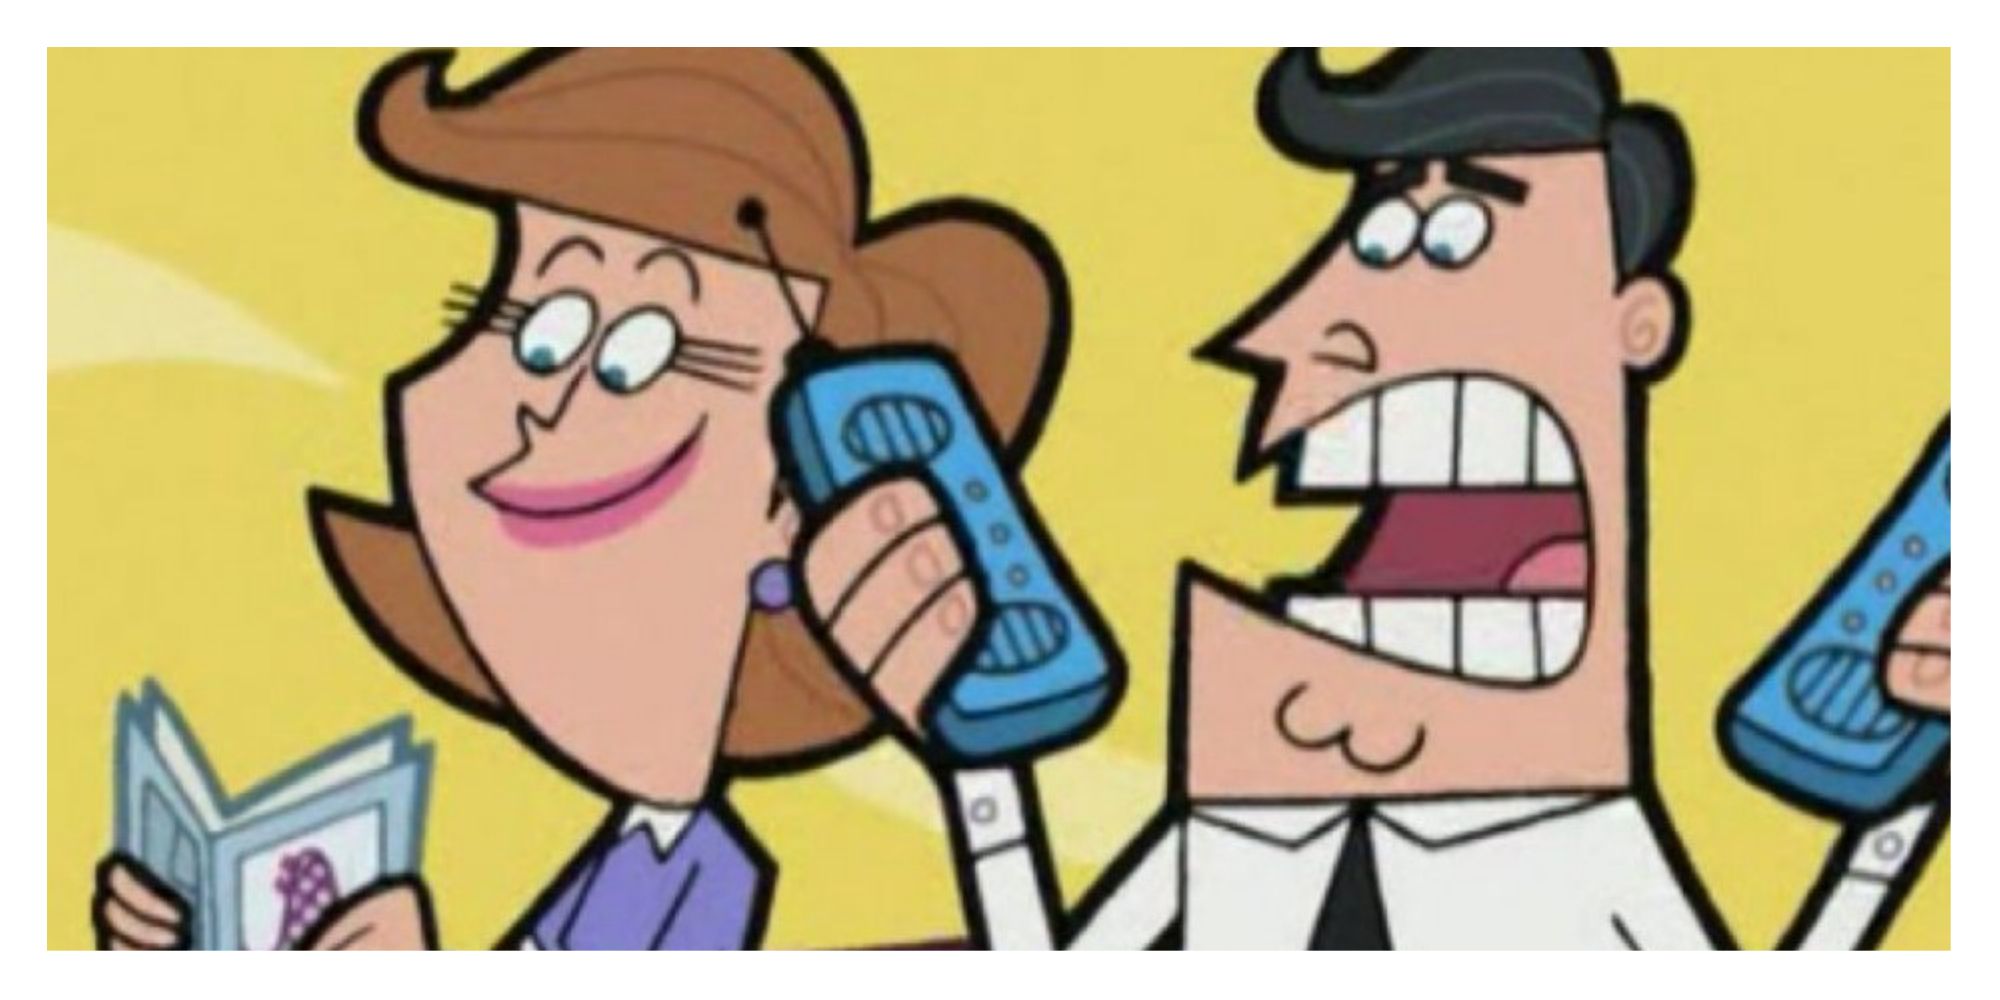 Timmy's Neglectful parents in Fairly OddParents